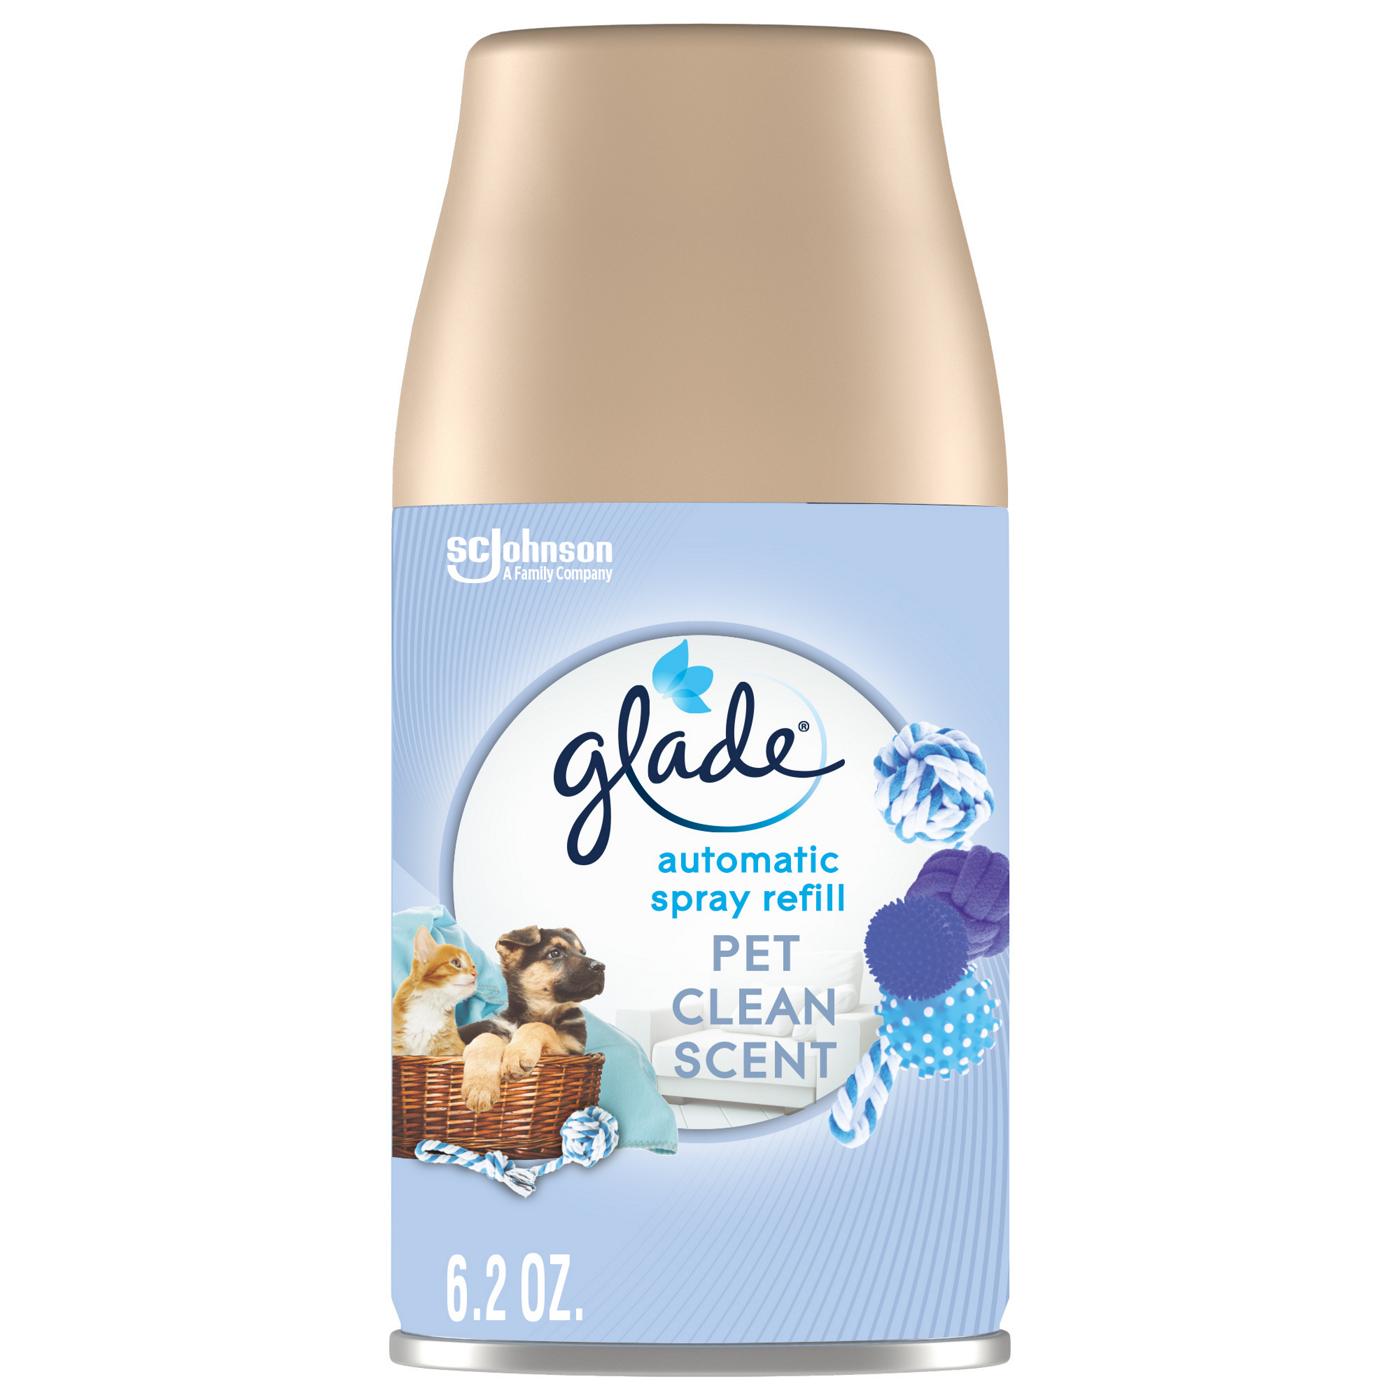 Glade Automatic Spray Refill - Pet Clean Scent; image 1 of 2